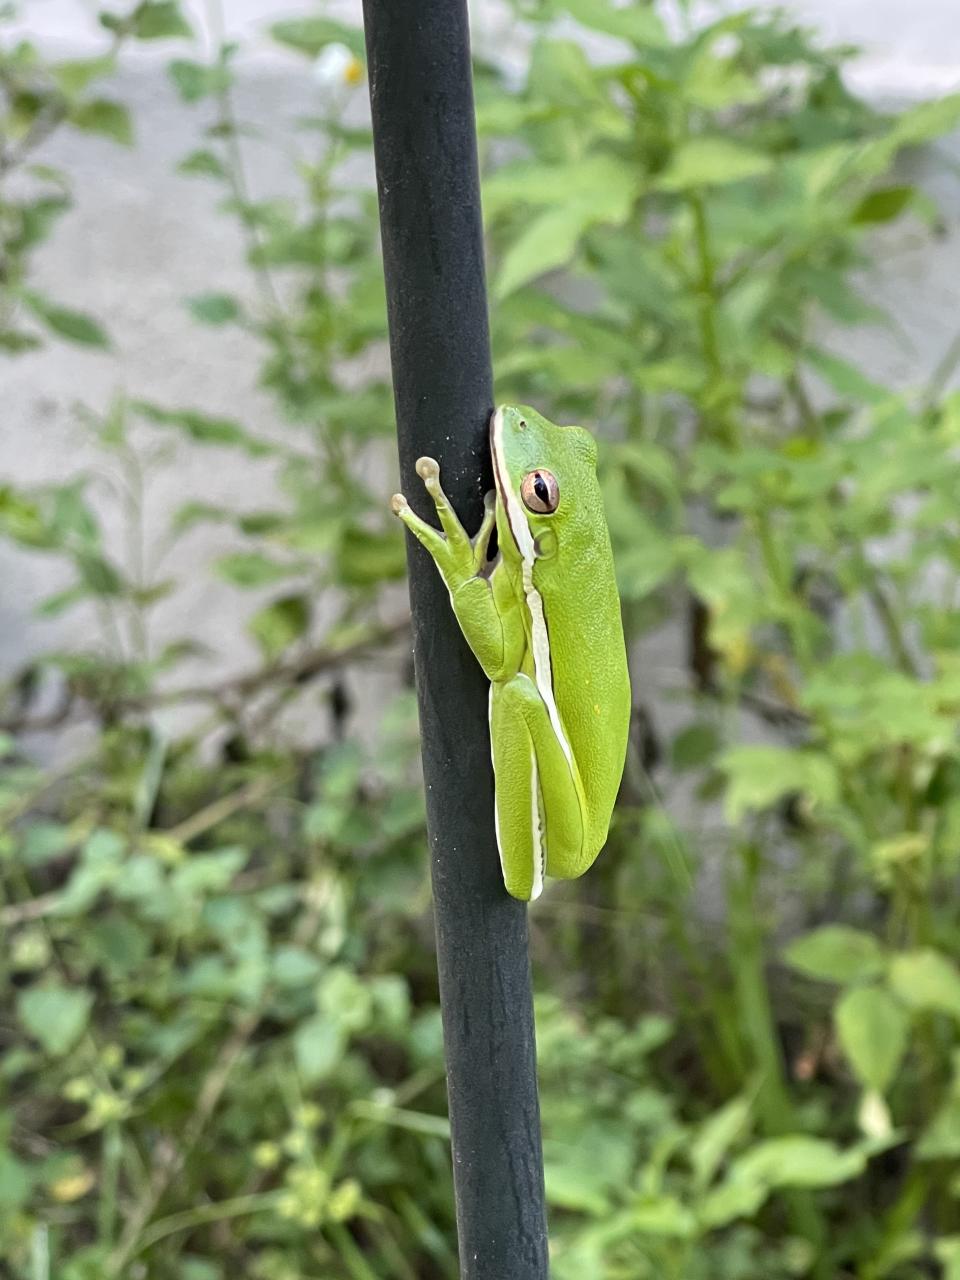 Green treefrogs (Hyla cinerea) do not seem to be shy around humans, you might even see one climbing your bird feeder pole.